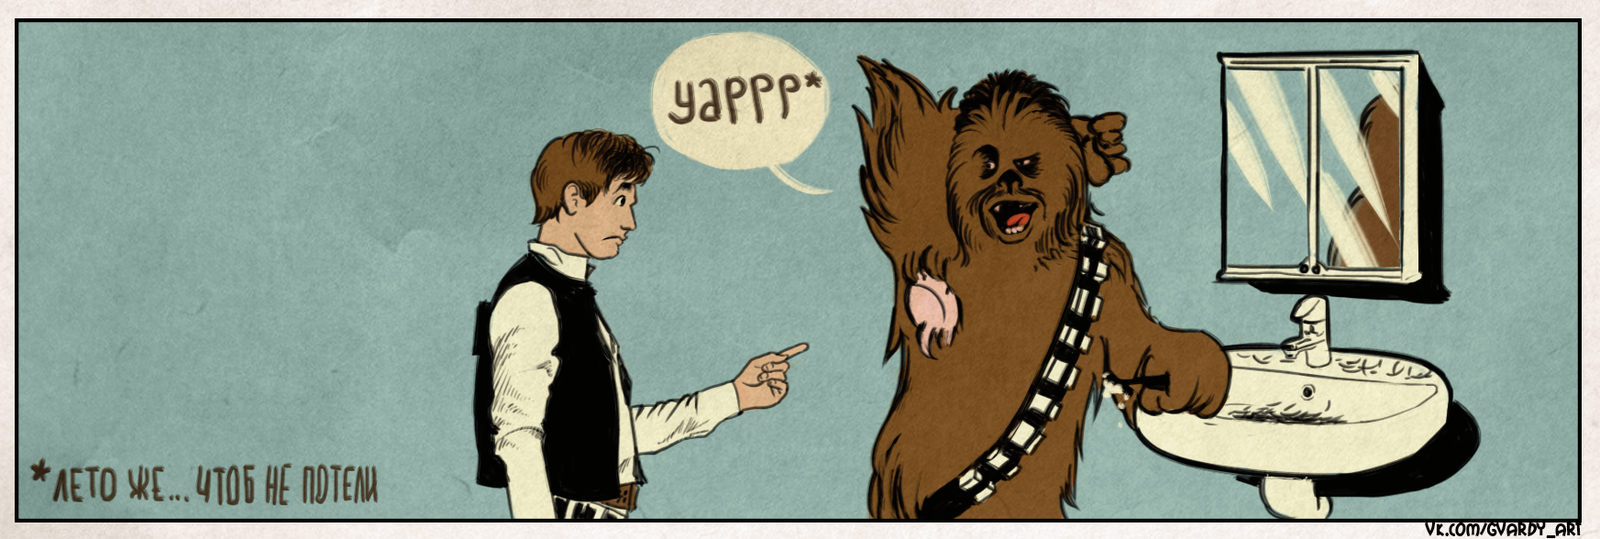 Here comes the summer... - My, Comics, Web comic, Chewbacca, Han Solo, Summer